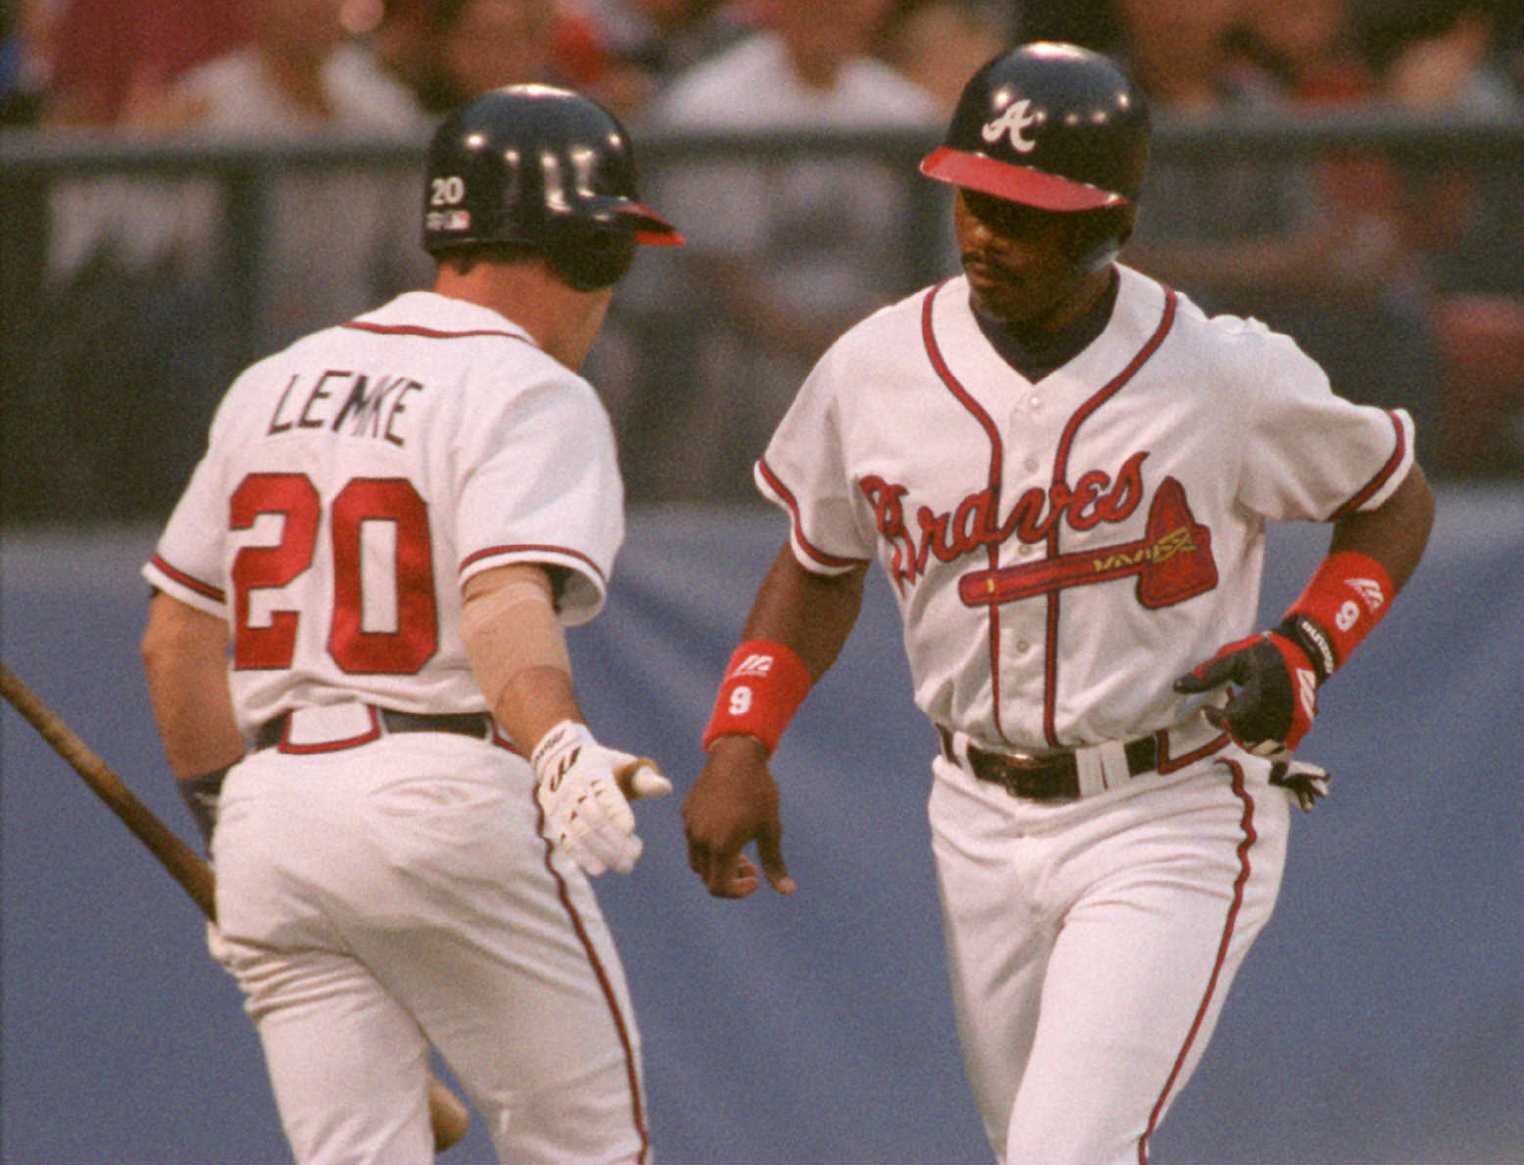 This Day in Braves History: Marquis Grissom extends hitting streak -  Battery Power